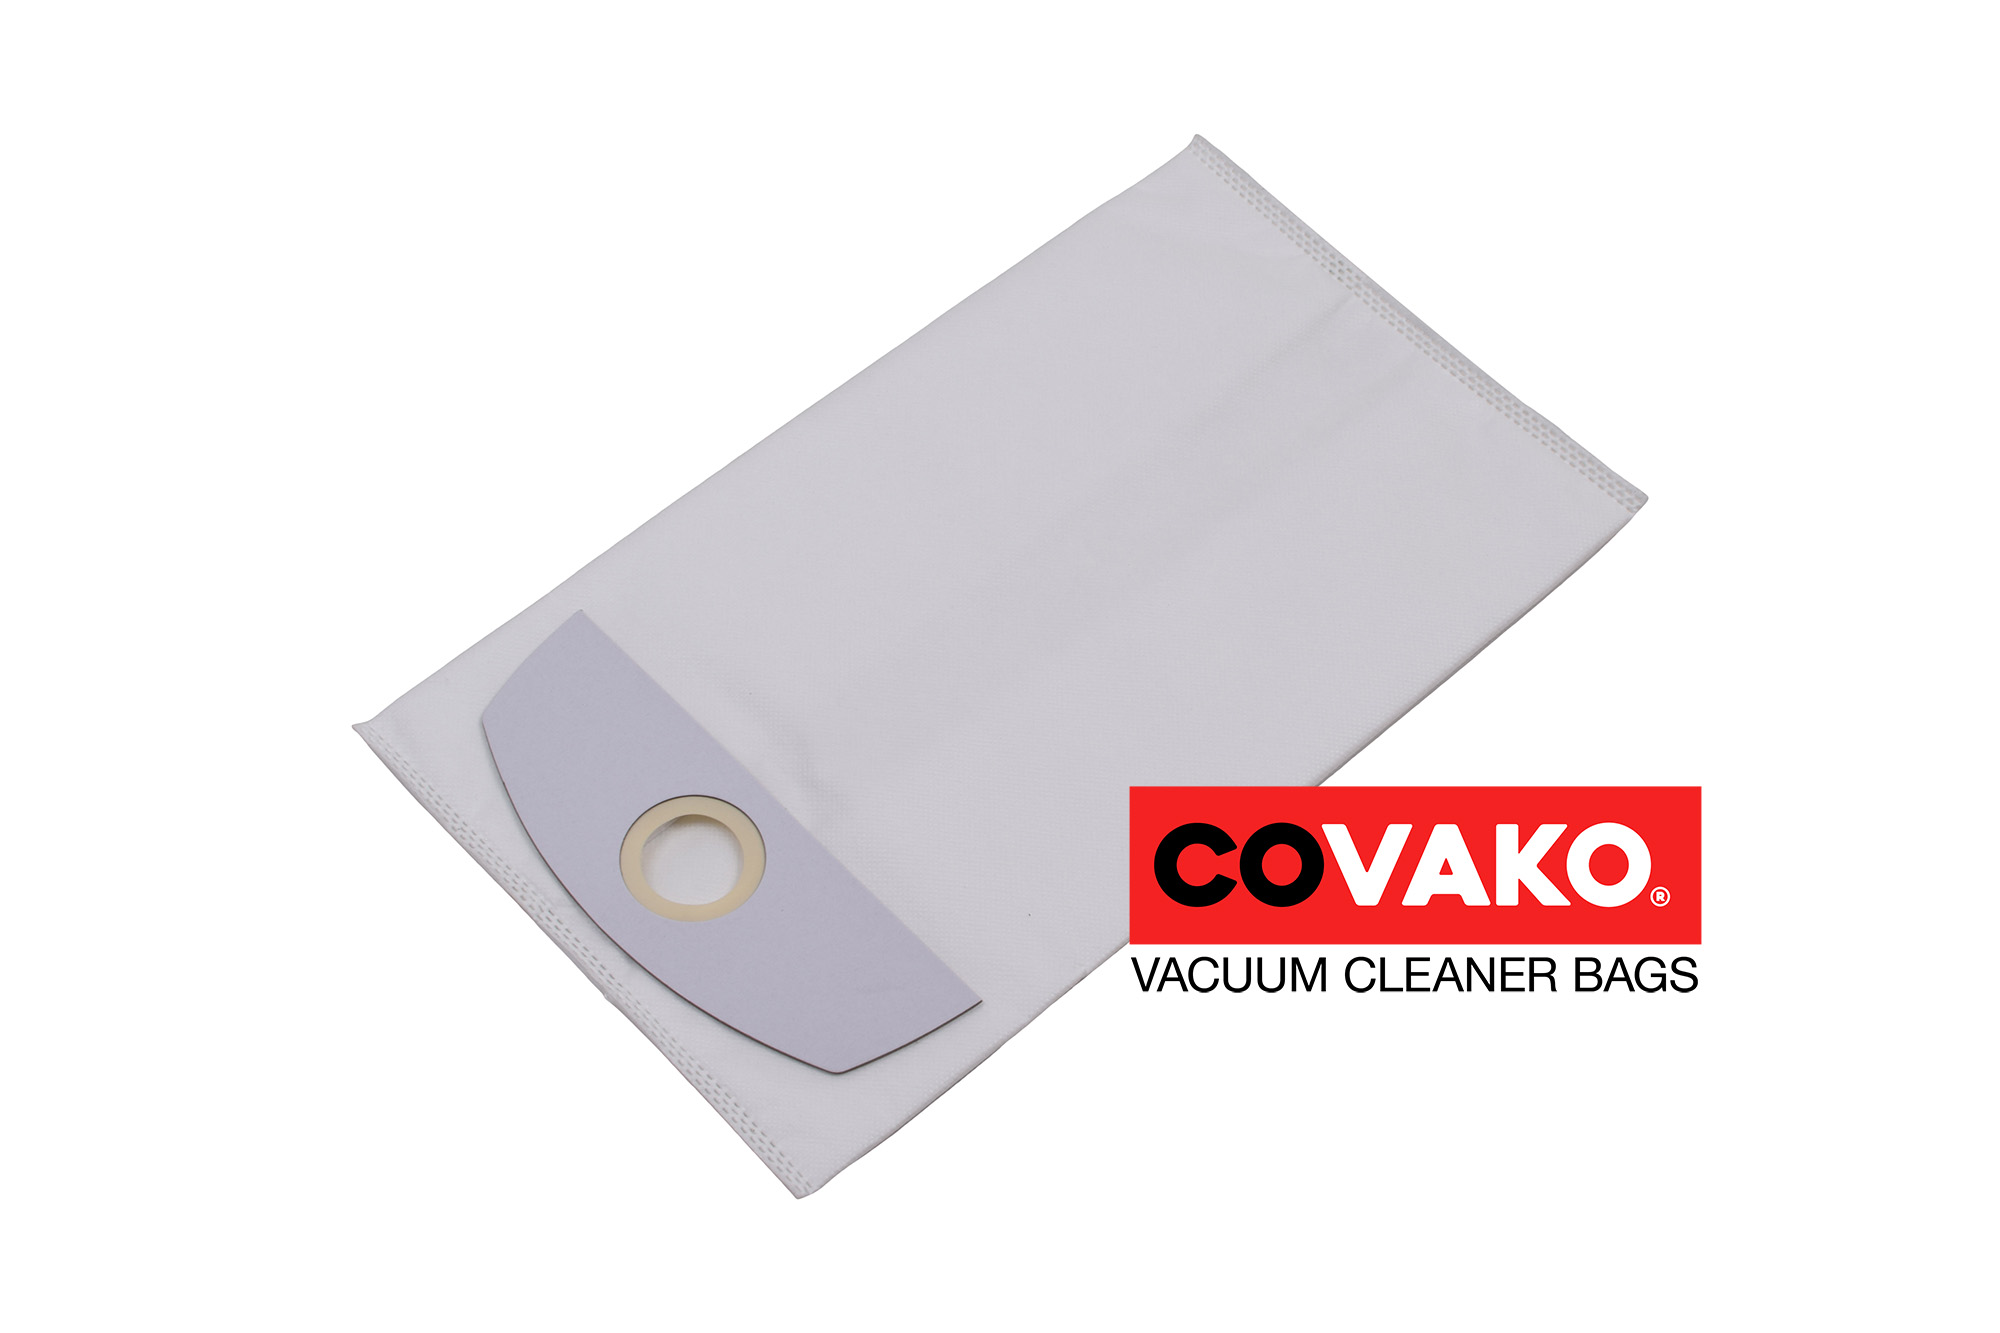 Metabo AS 18 L PC Compact / Synthesis - Metabo vacuum cleaner bags